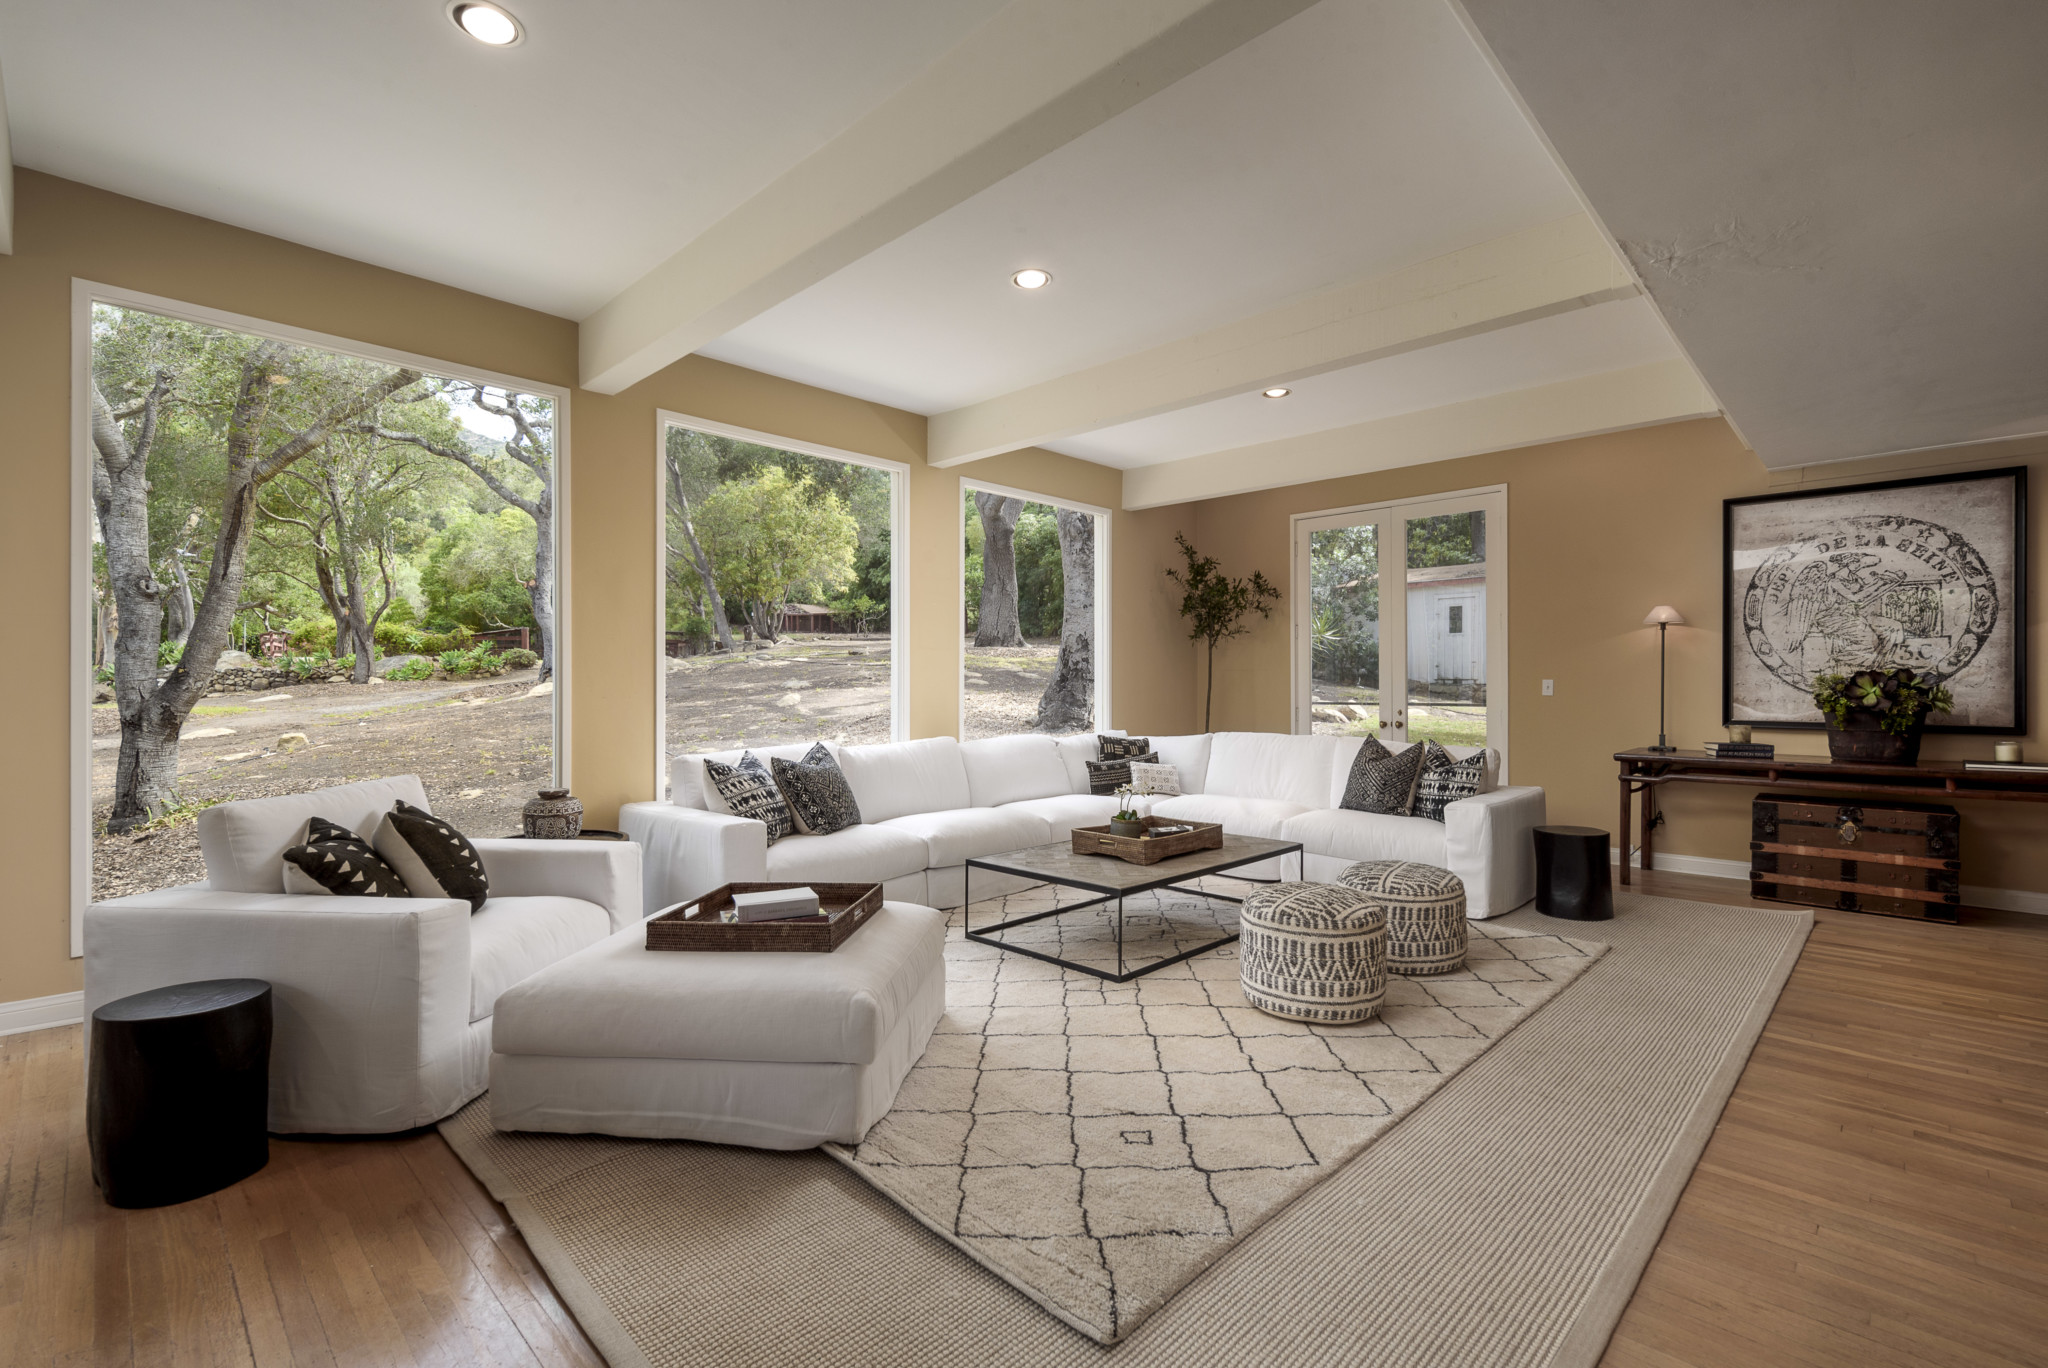 one of the many spacious living areas, framed by romantic oak trees and mountain views.